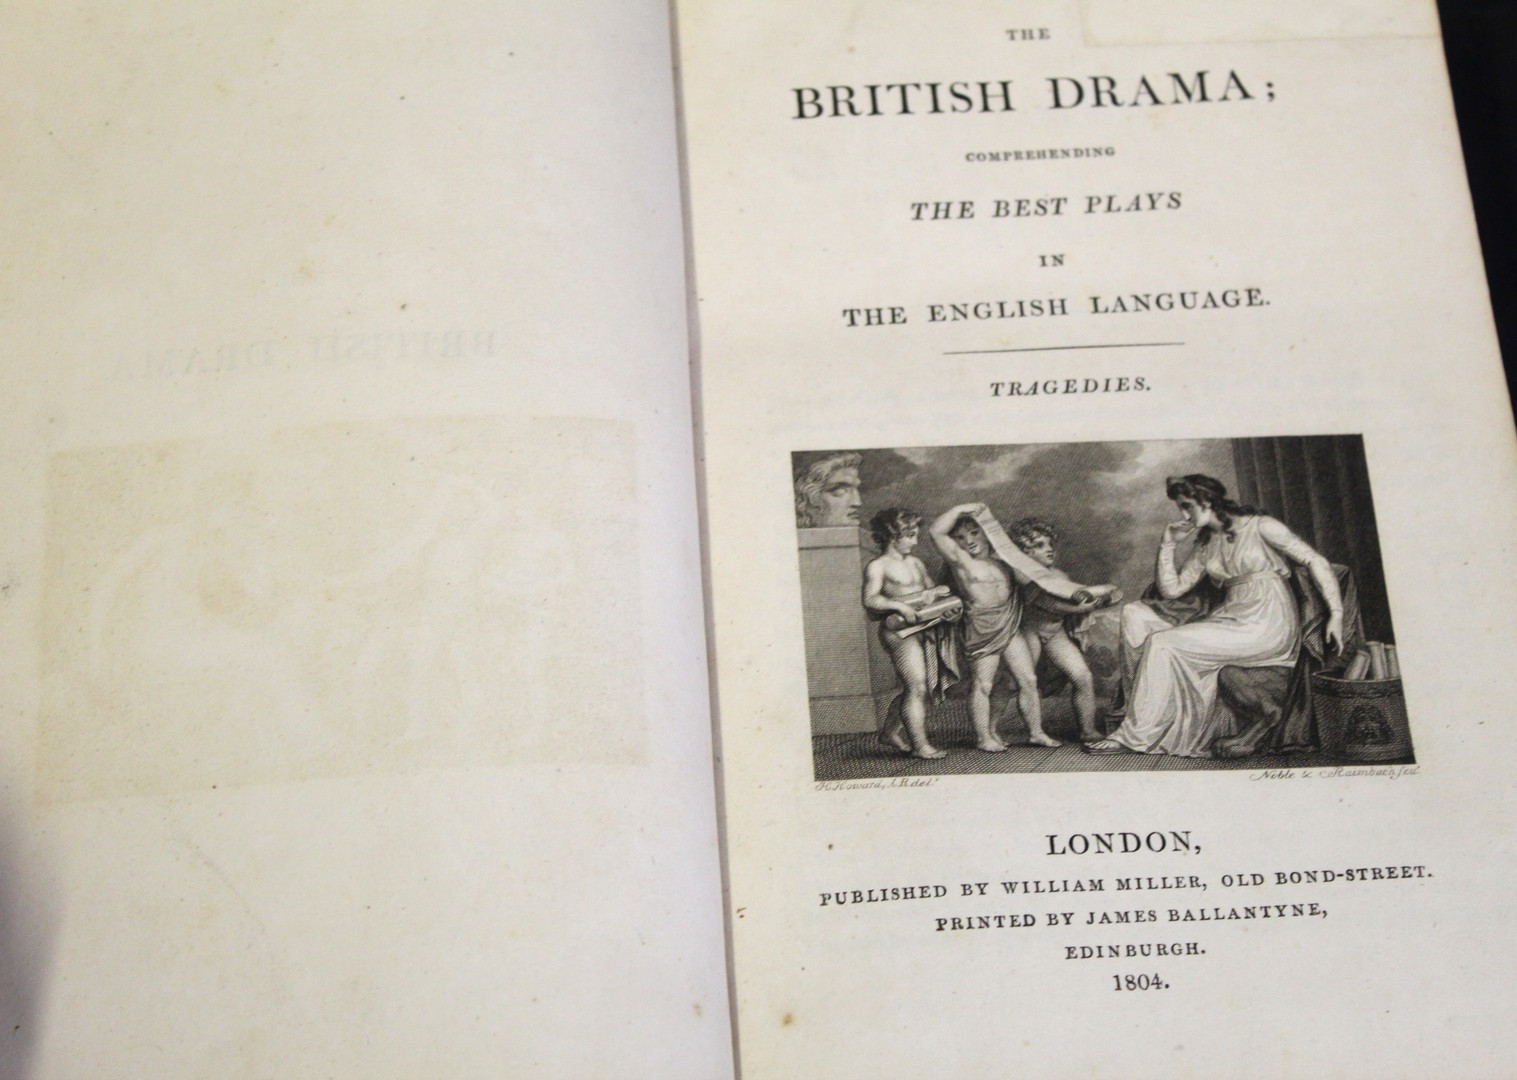 THE BRITISH DRAMA COMPREHENDING THE BEST PLAYS IN THE ENGLISH LANGUAGE, COMEDIES - TRAGEDIES - - Image 2 of 2